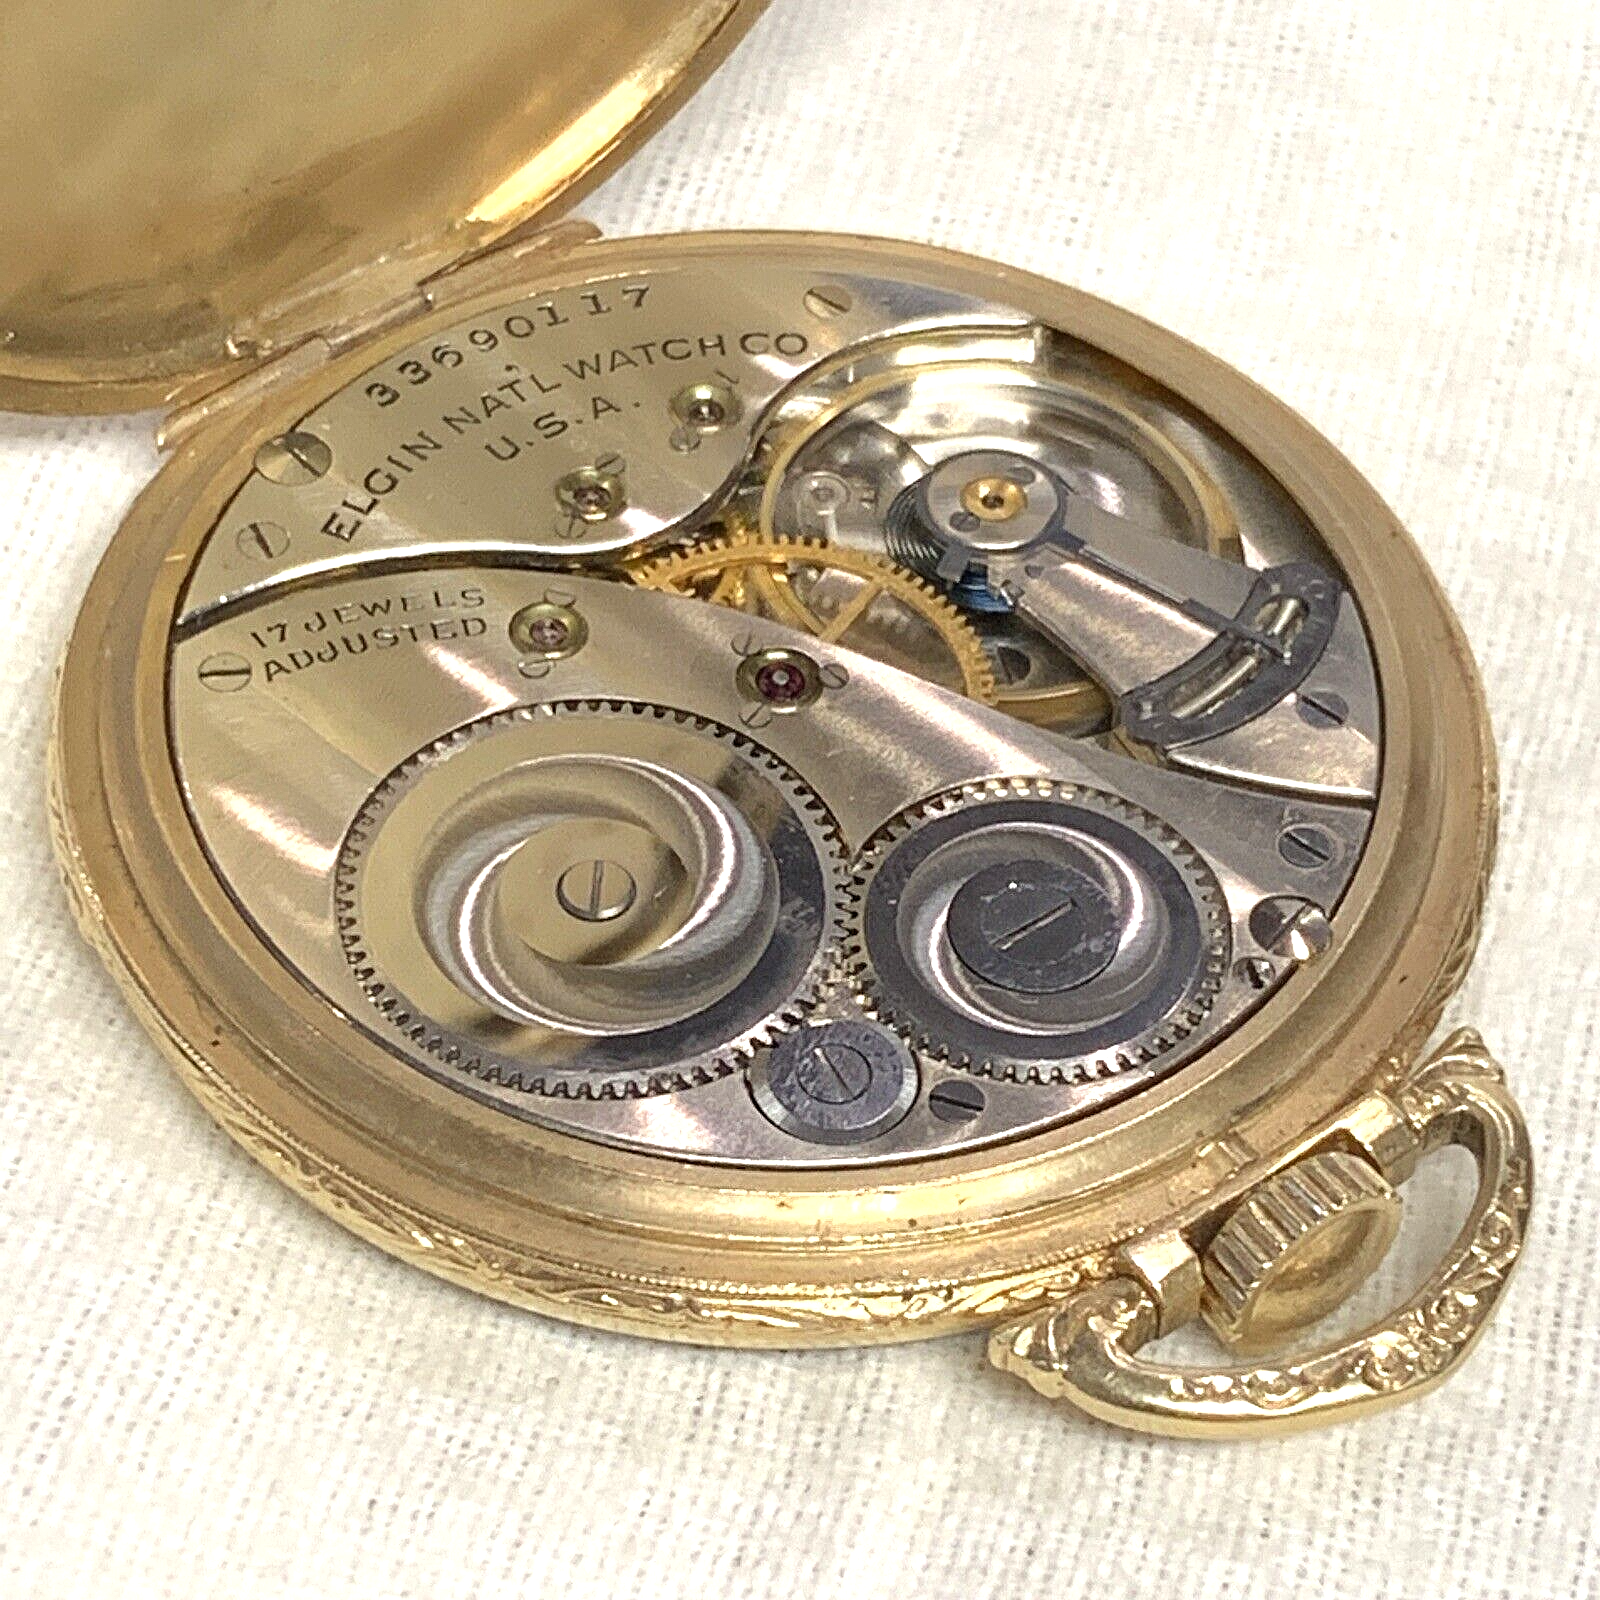 ELGIN 14K Solid Gold 44mm Open Face Pocket Watch - Runs Great Excellent Cond.